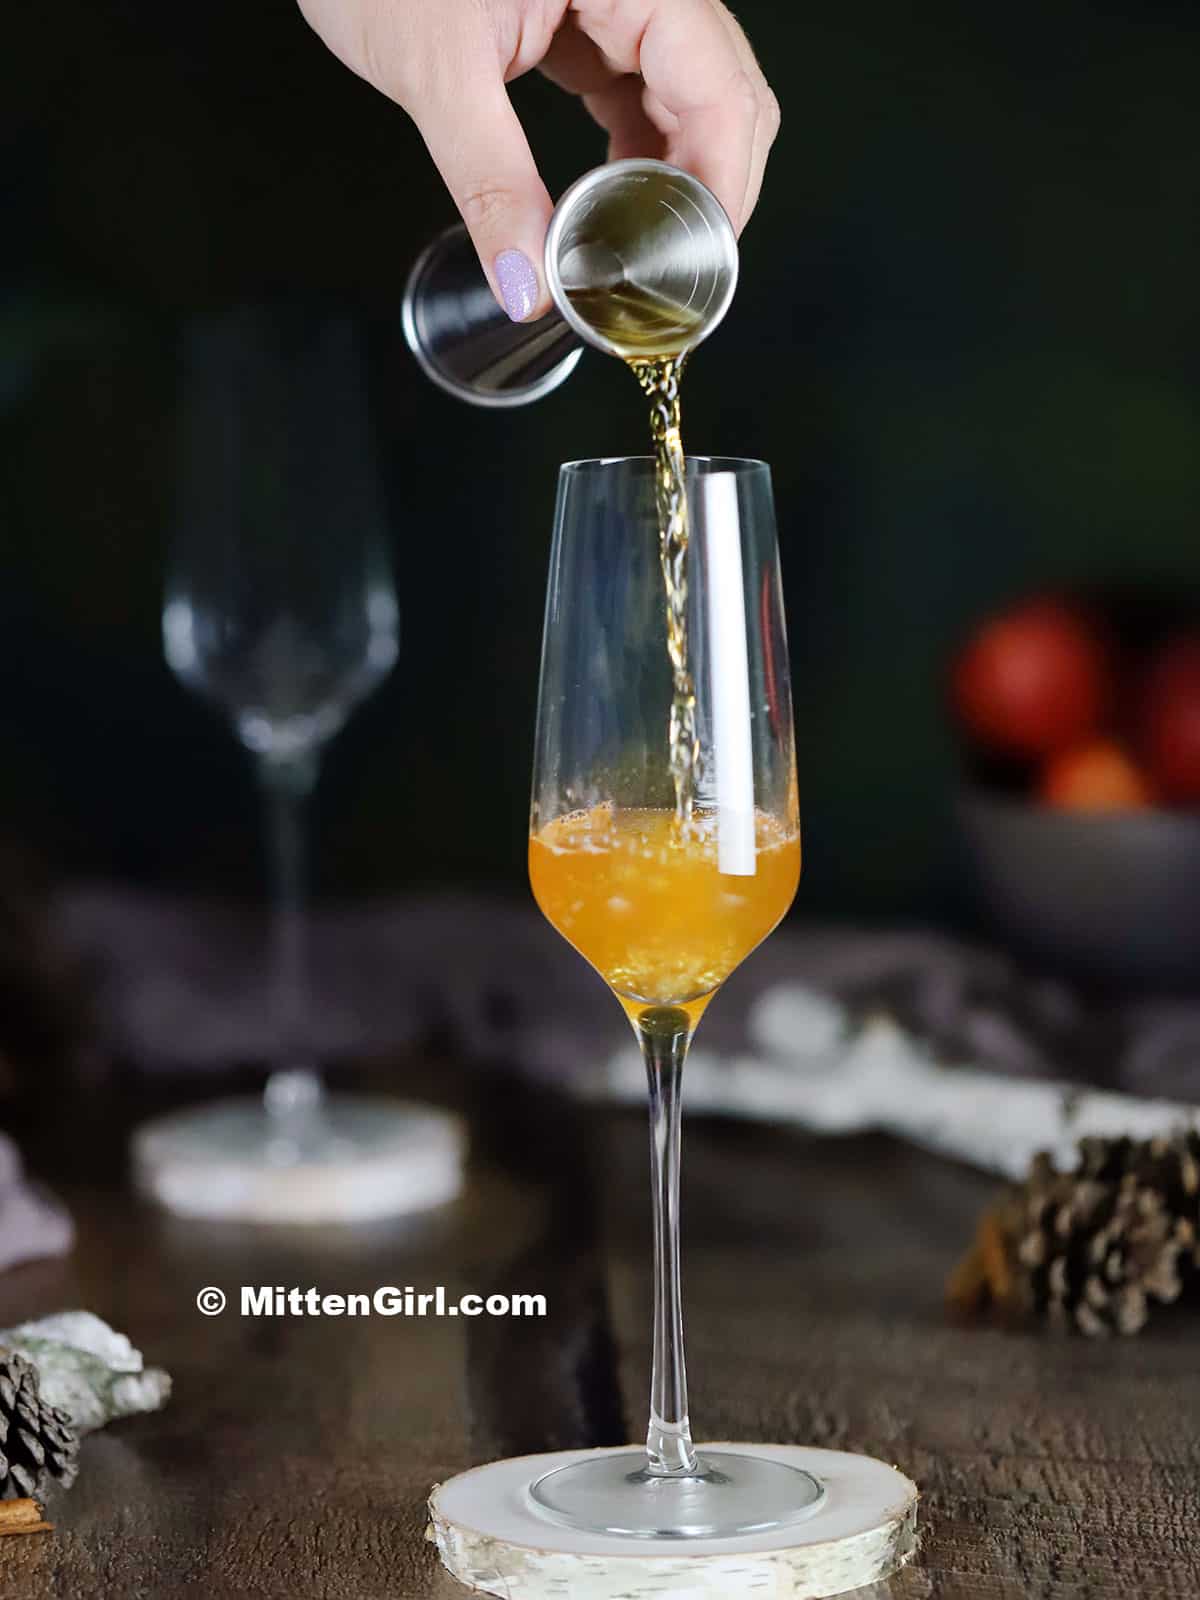 Pouring apple cinnamon infused gin into a champagne flute